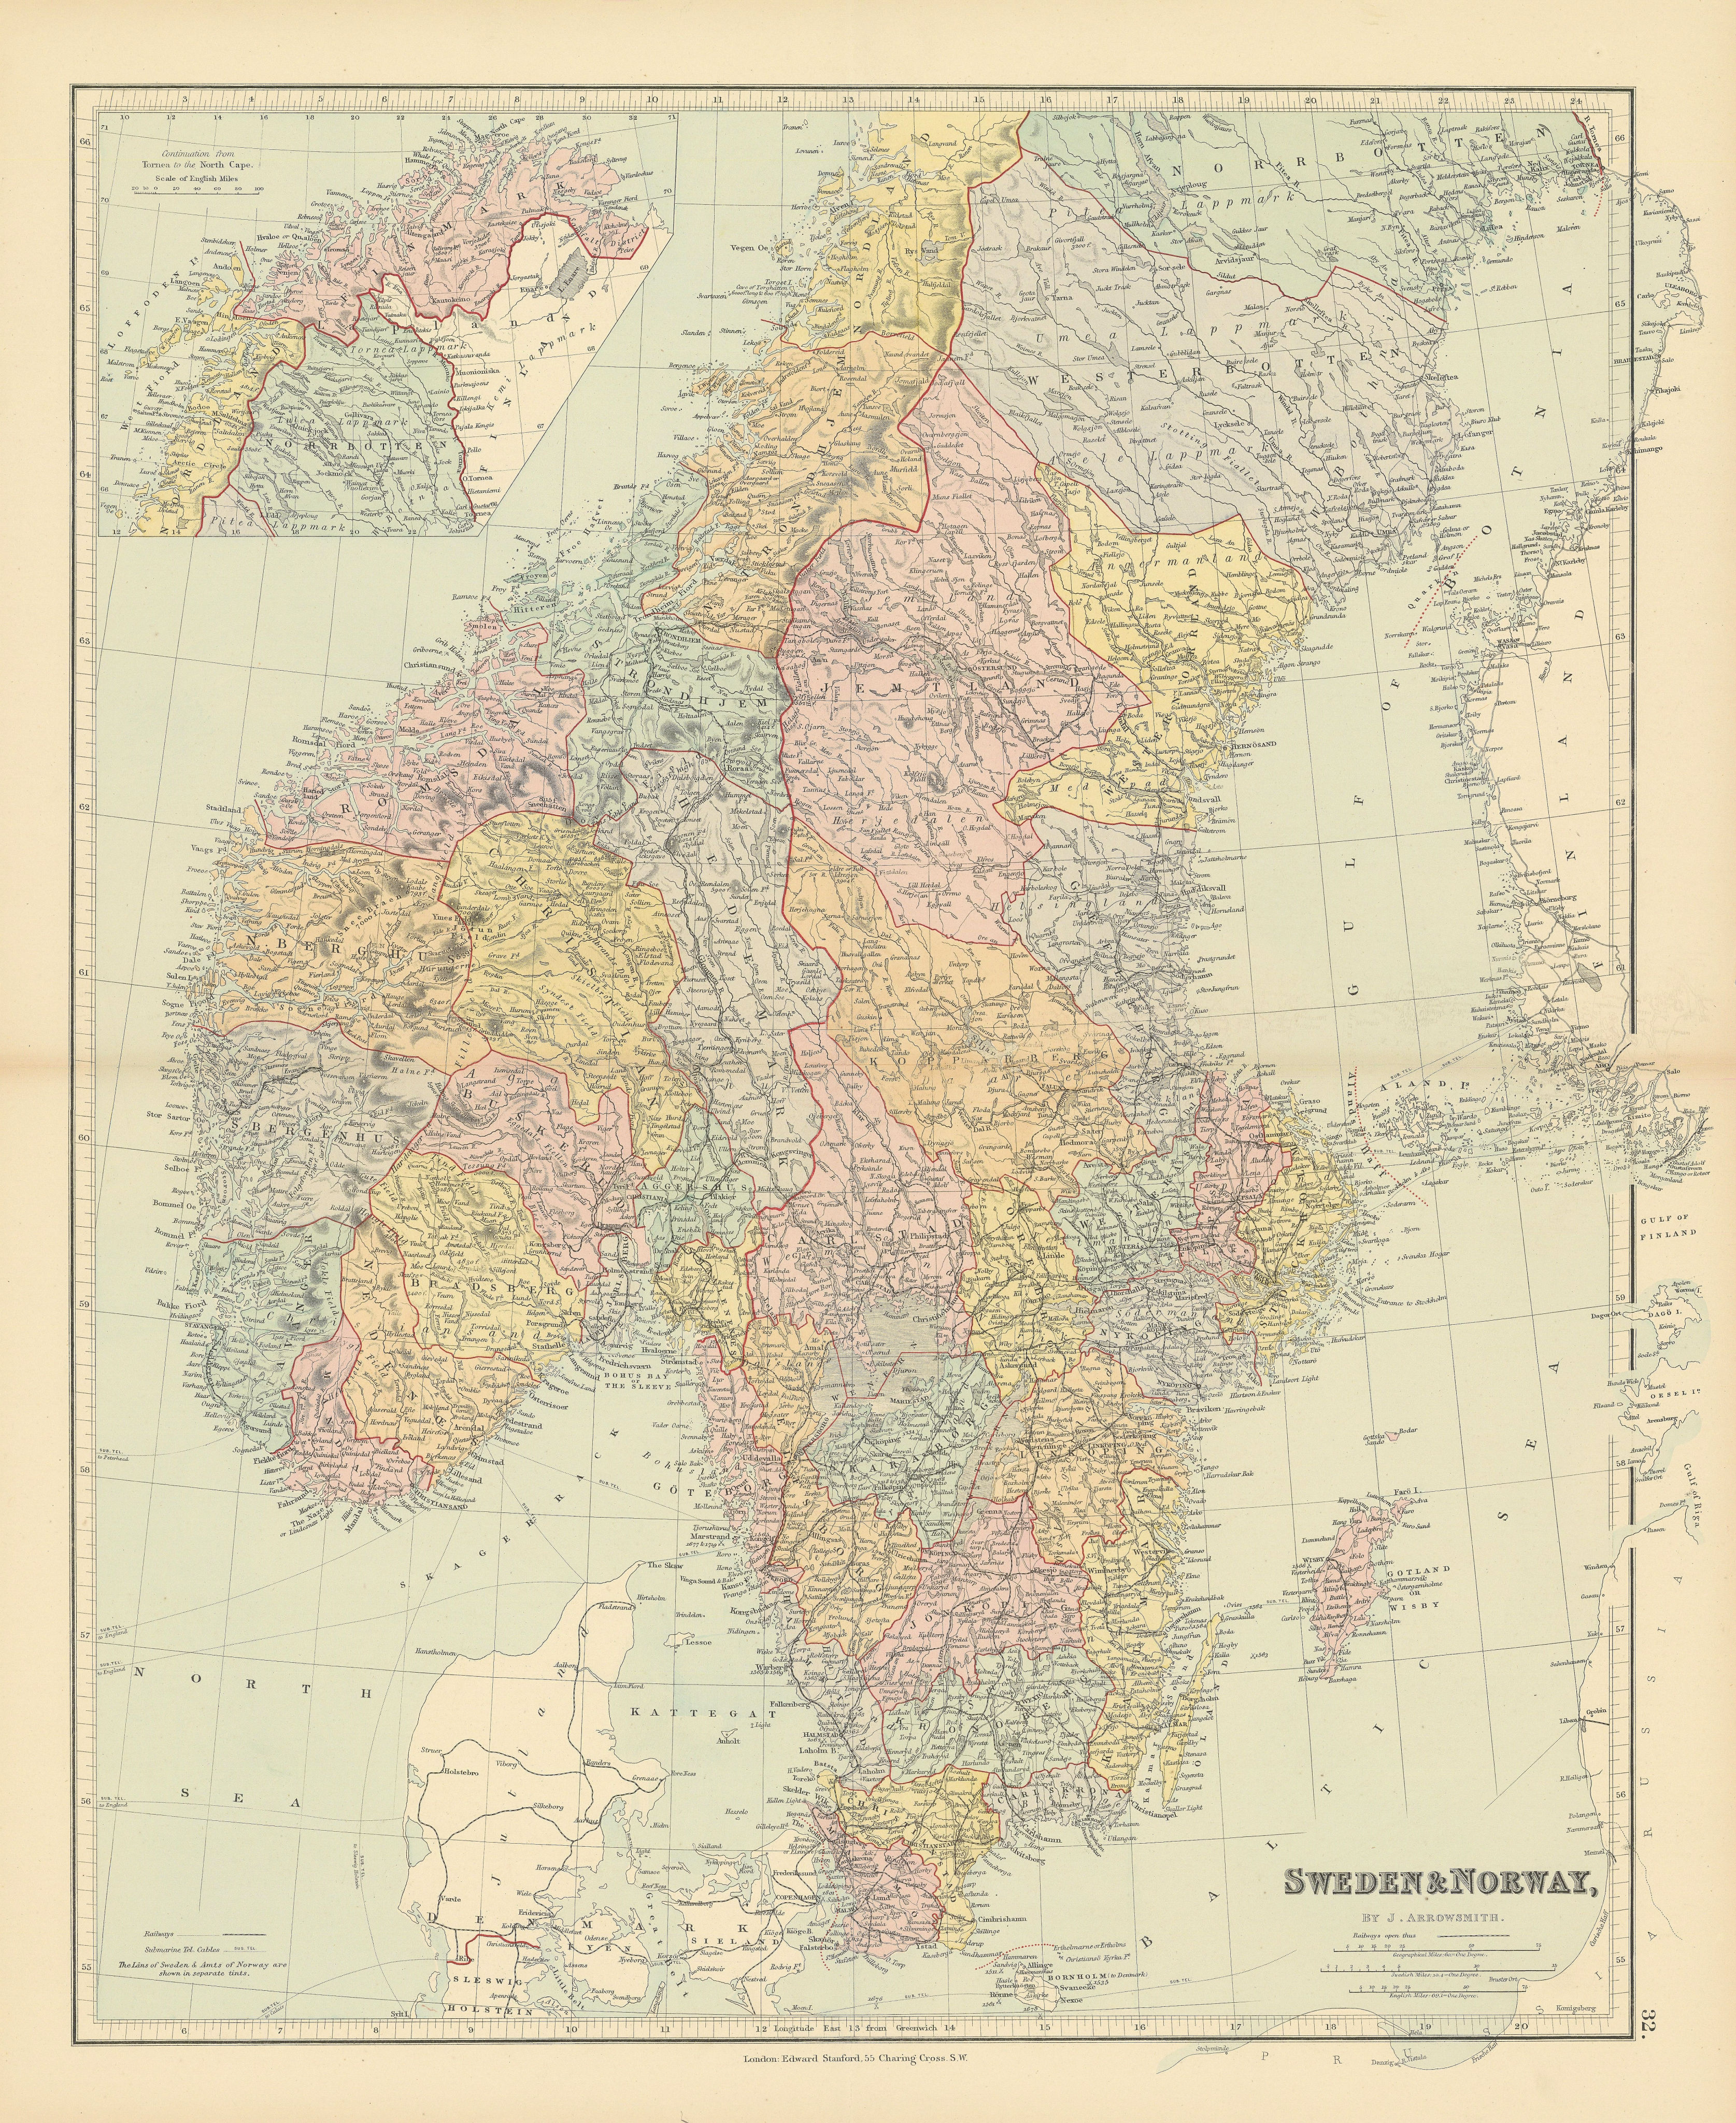 Scandinavia political divisions. Sweden Lans. Norway Amts. STANFORD 1887 map